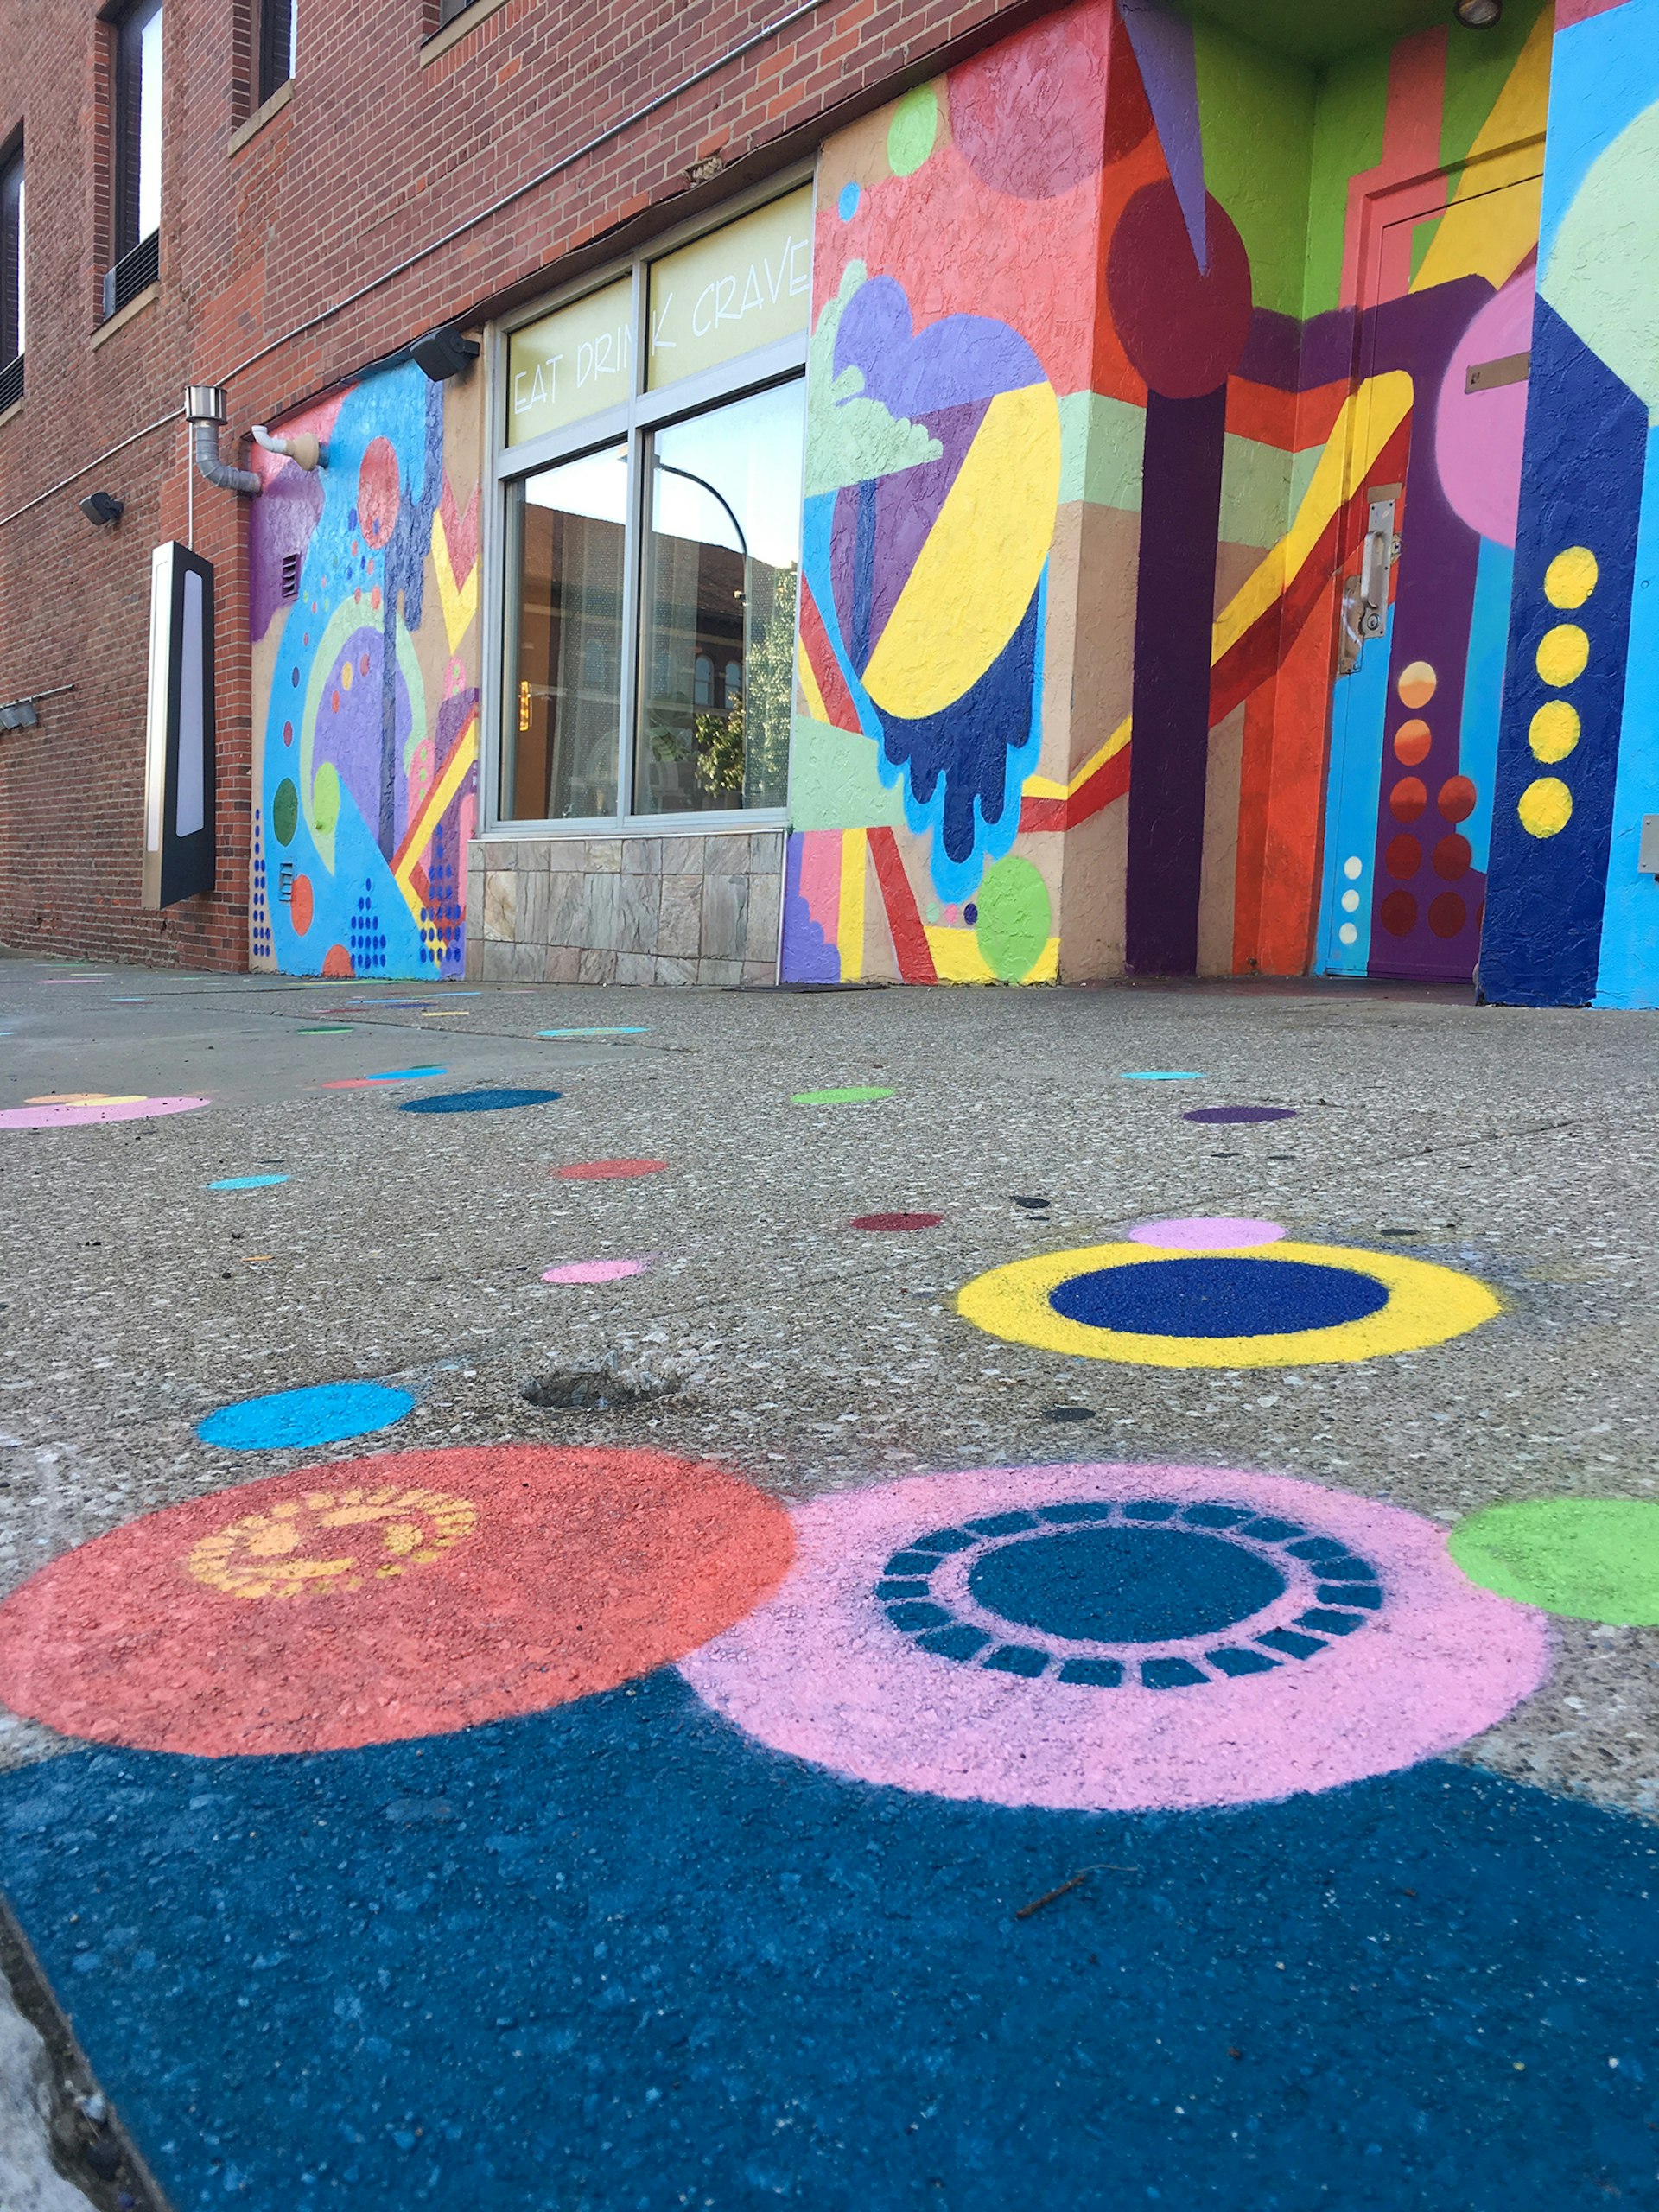 An old brick building is now covered in abstract geometric designs in yellow, blue, purple, orange and red. The sidewalk in front of building has colorful circles painted on it.